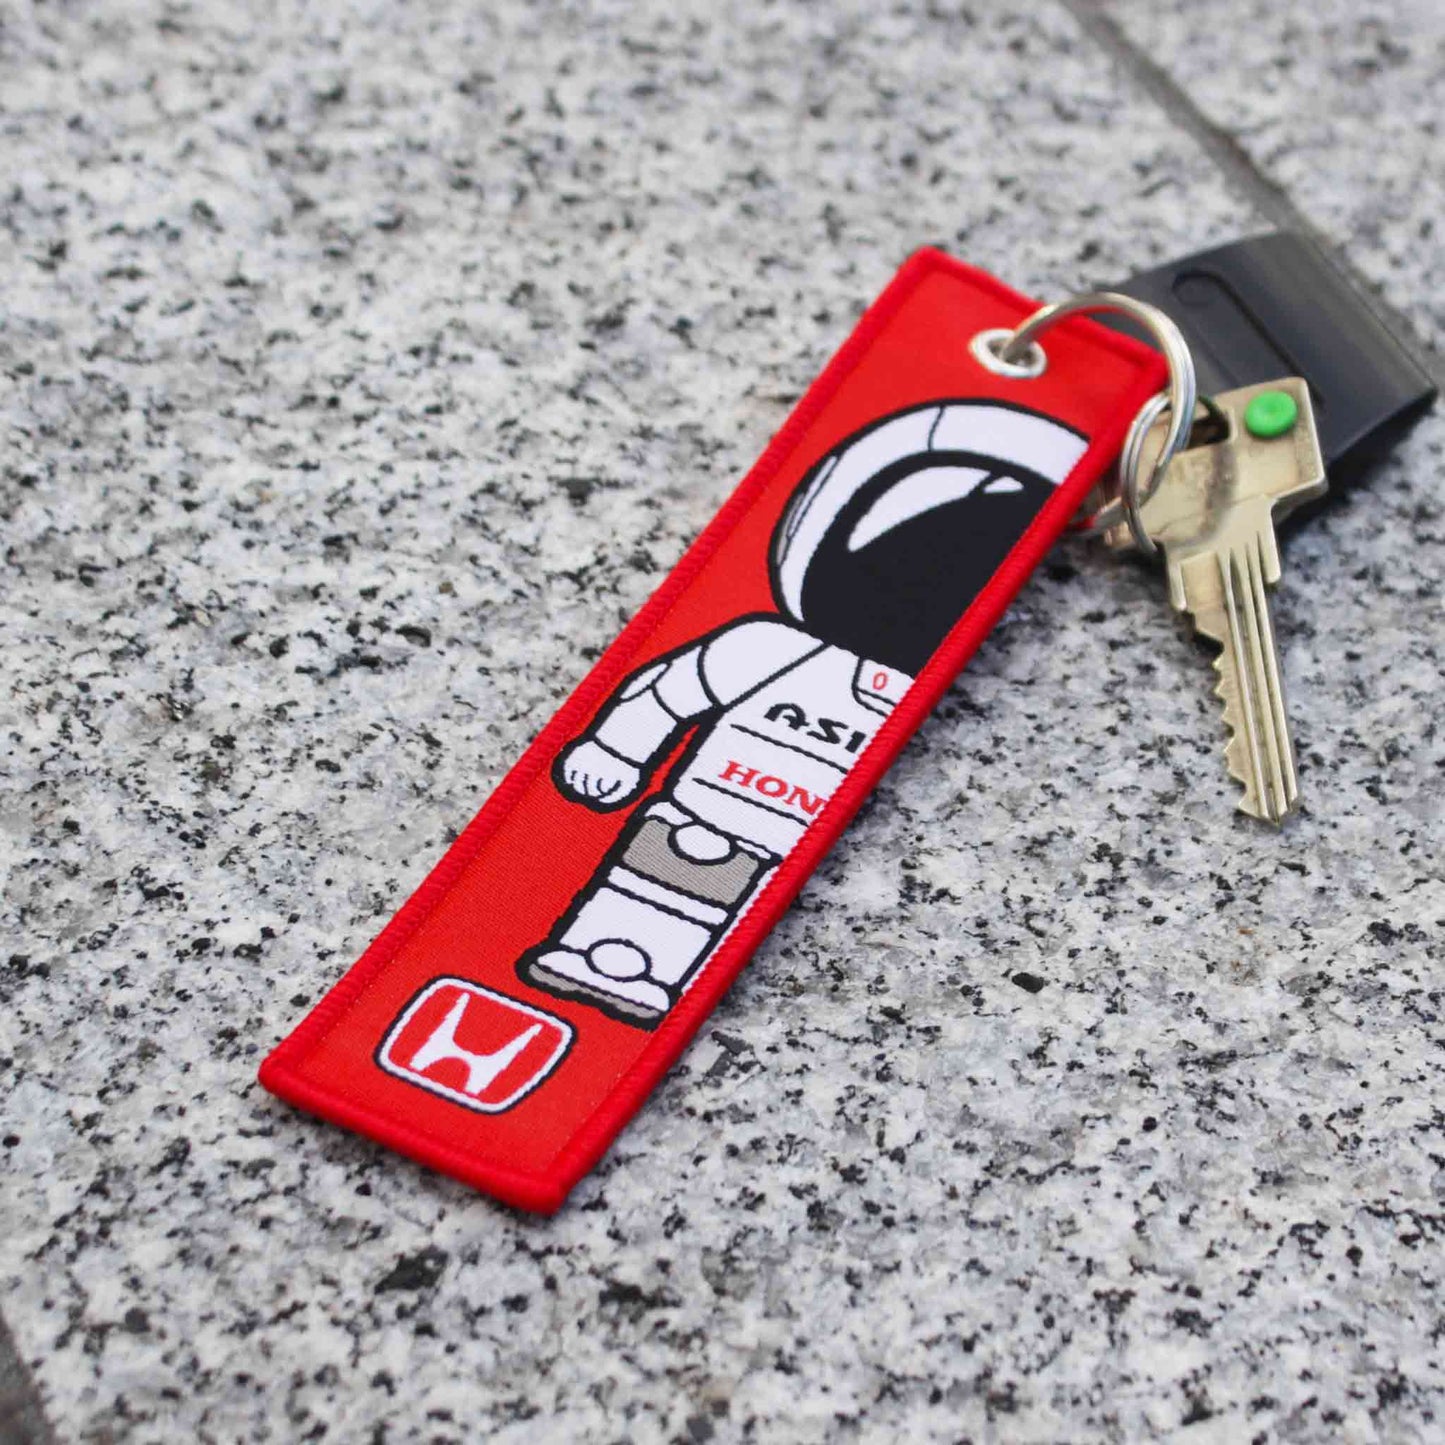 A red Honda Asimo lanyard on a marble floor